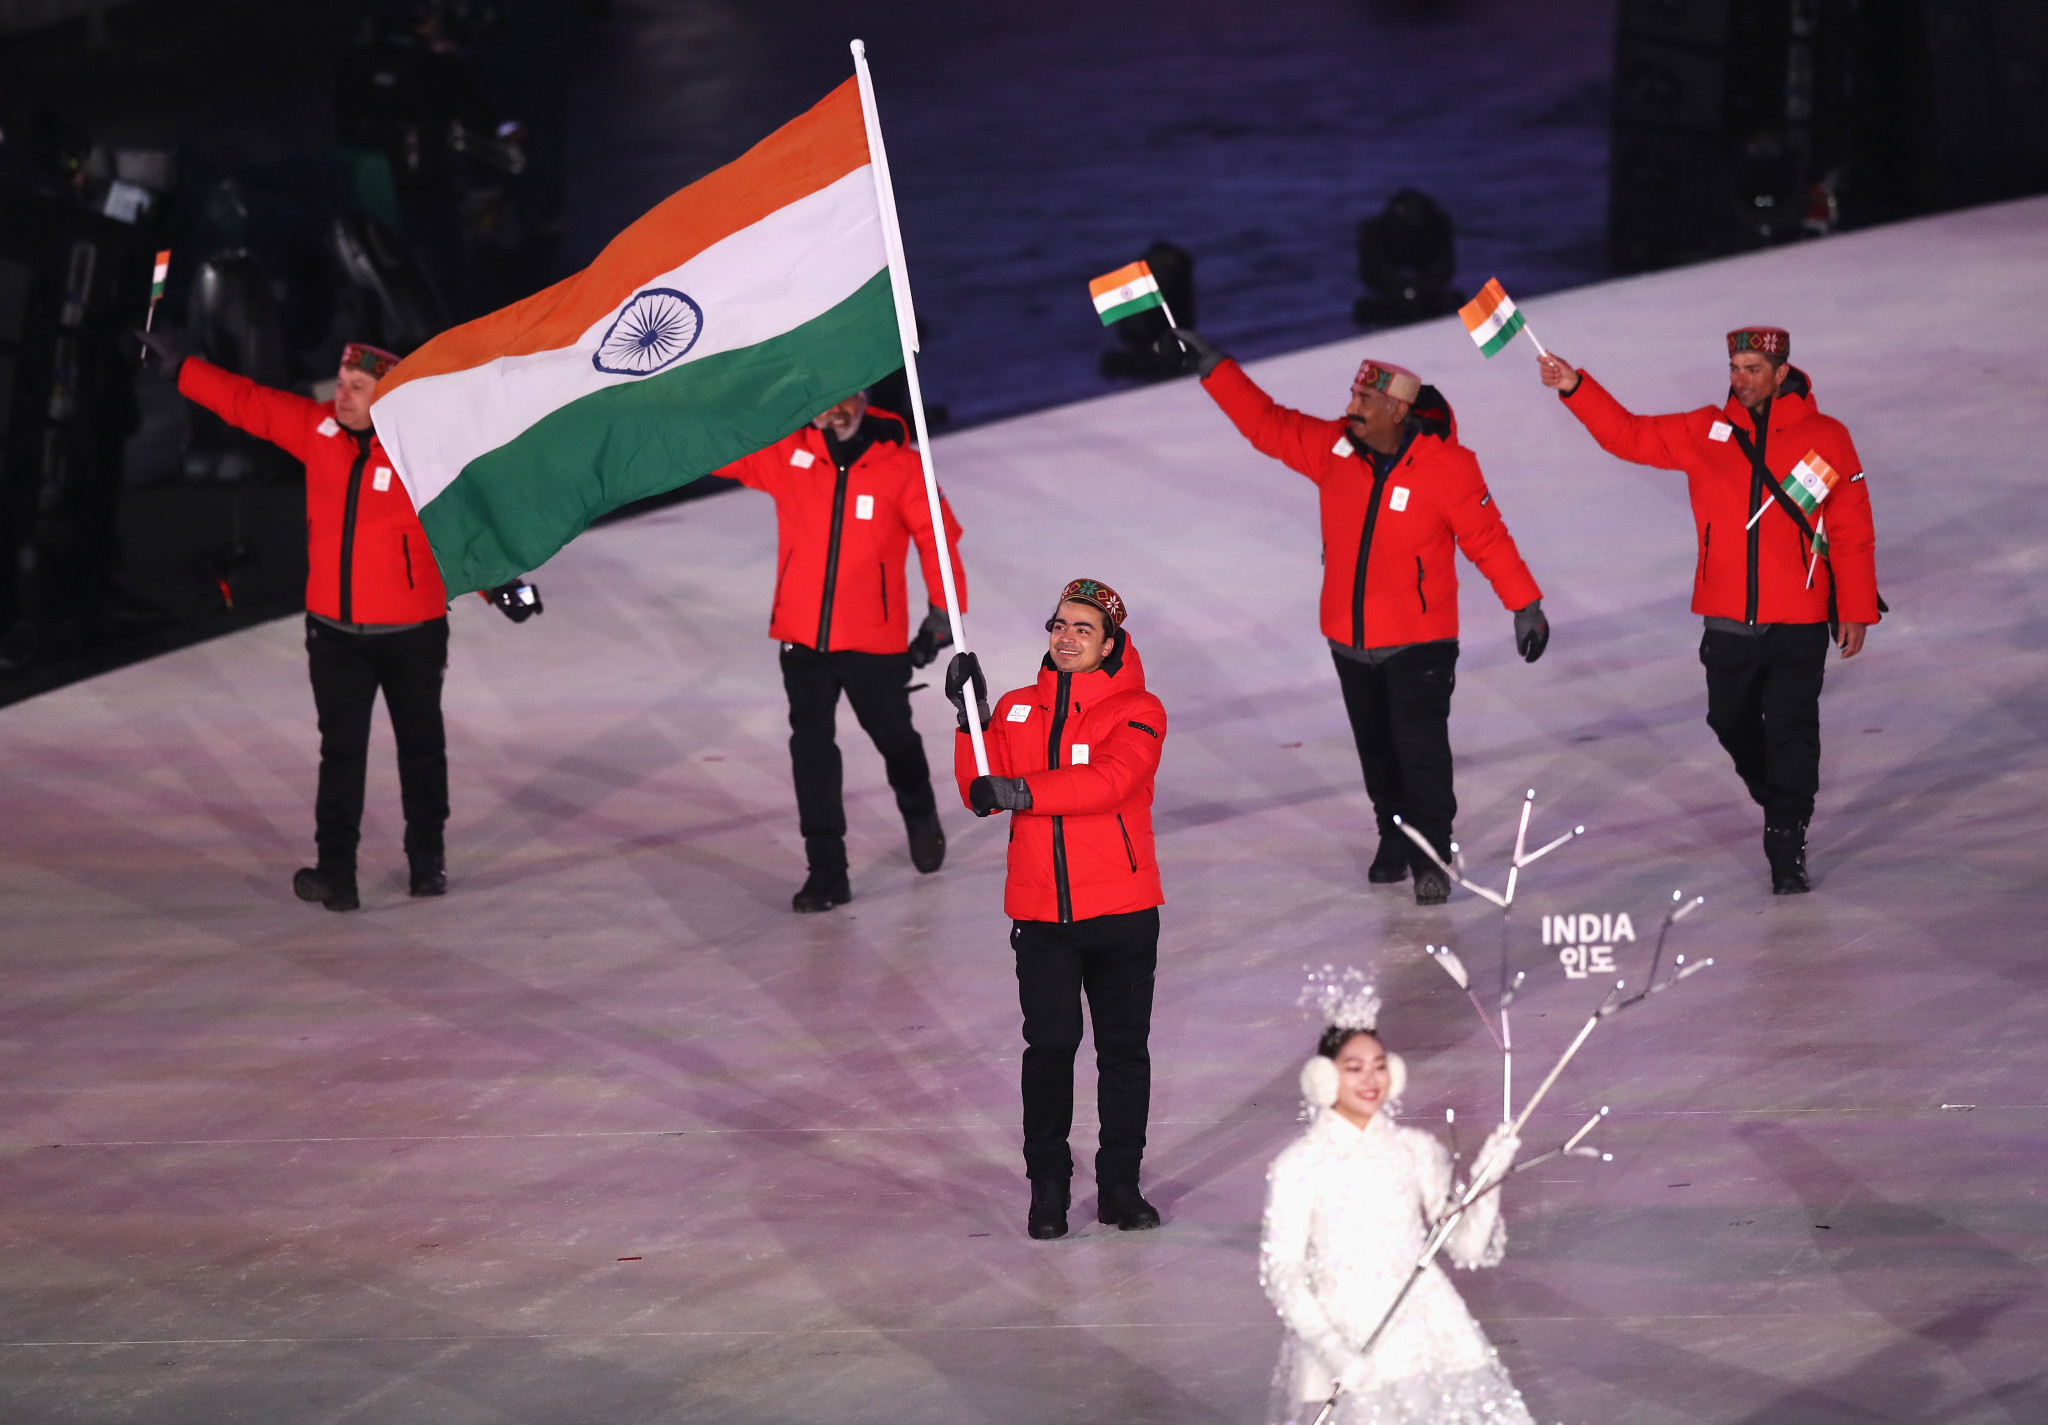 IOC set to lift suspension on India hosting major events after Government provides guarantees for all nations